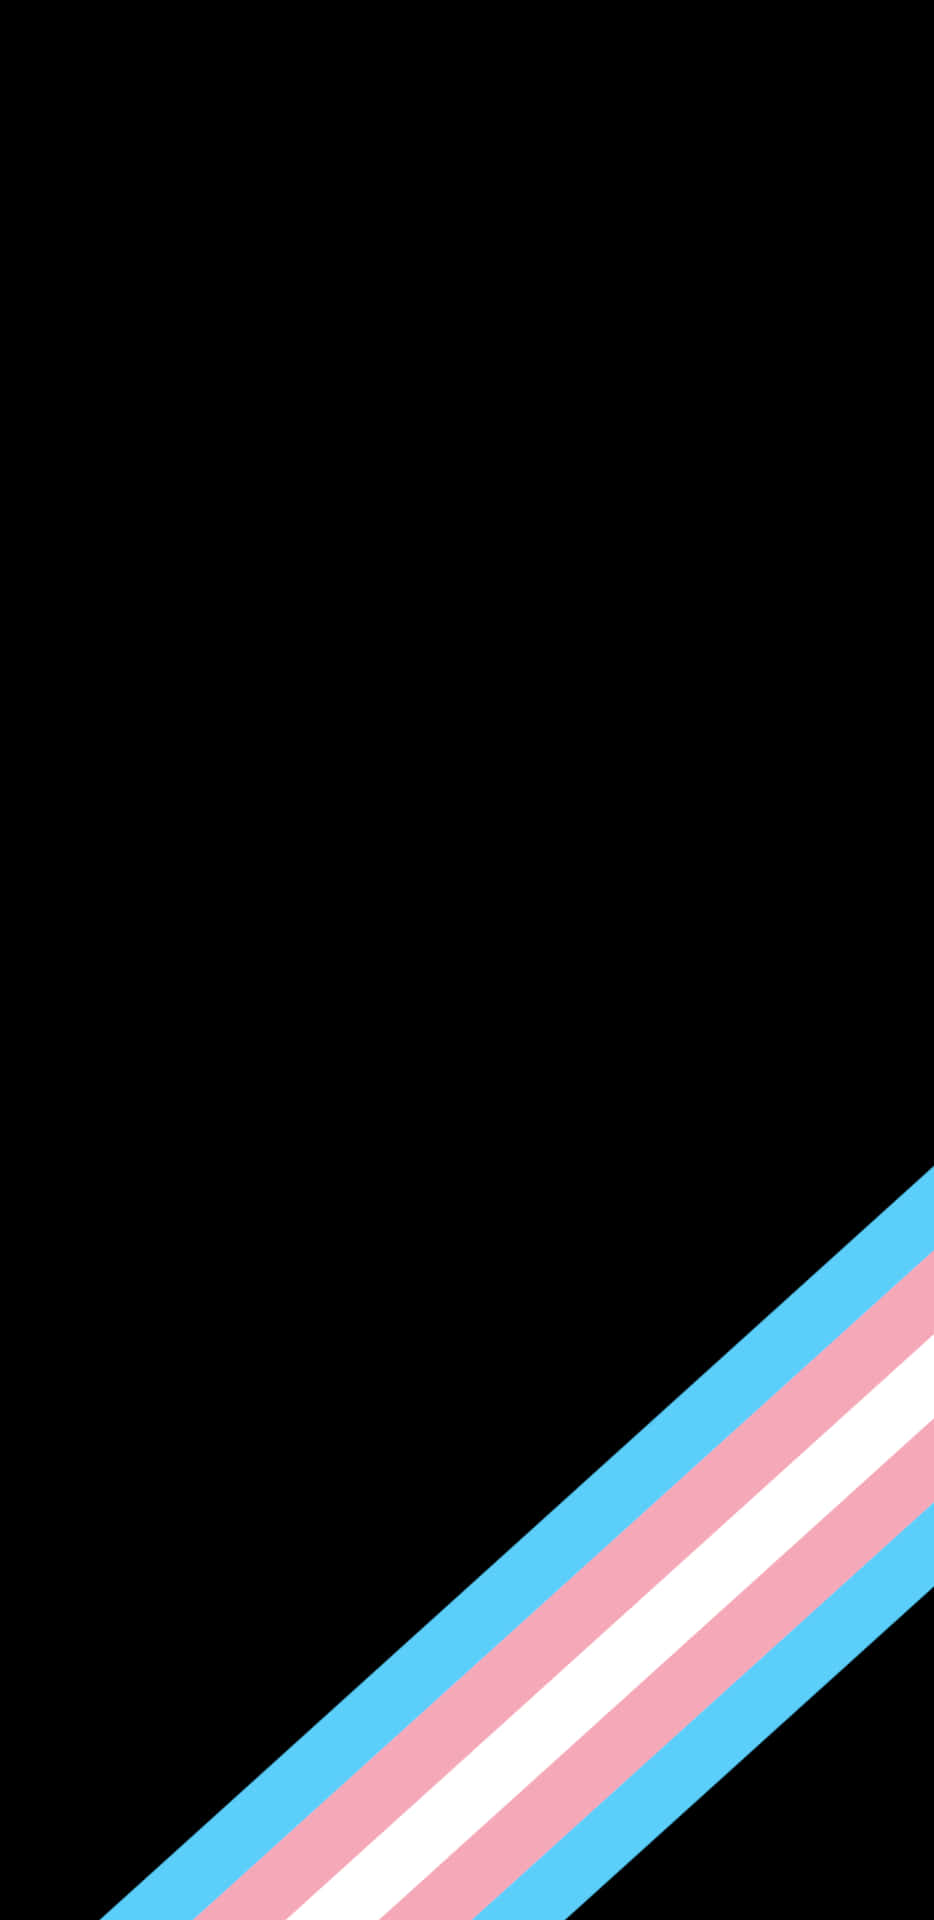 A Black And White Image Of A Transgender Flag